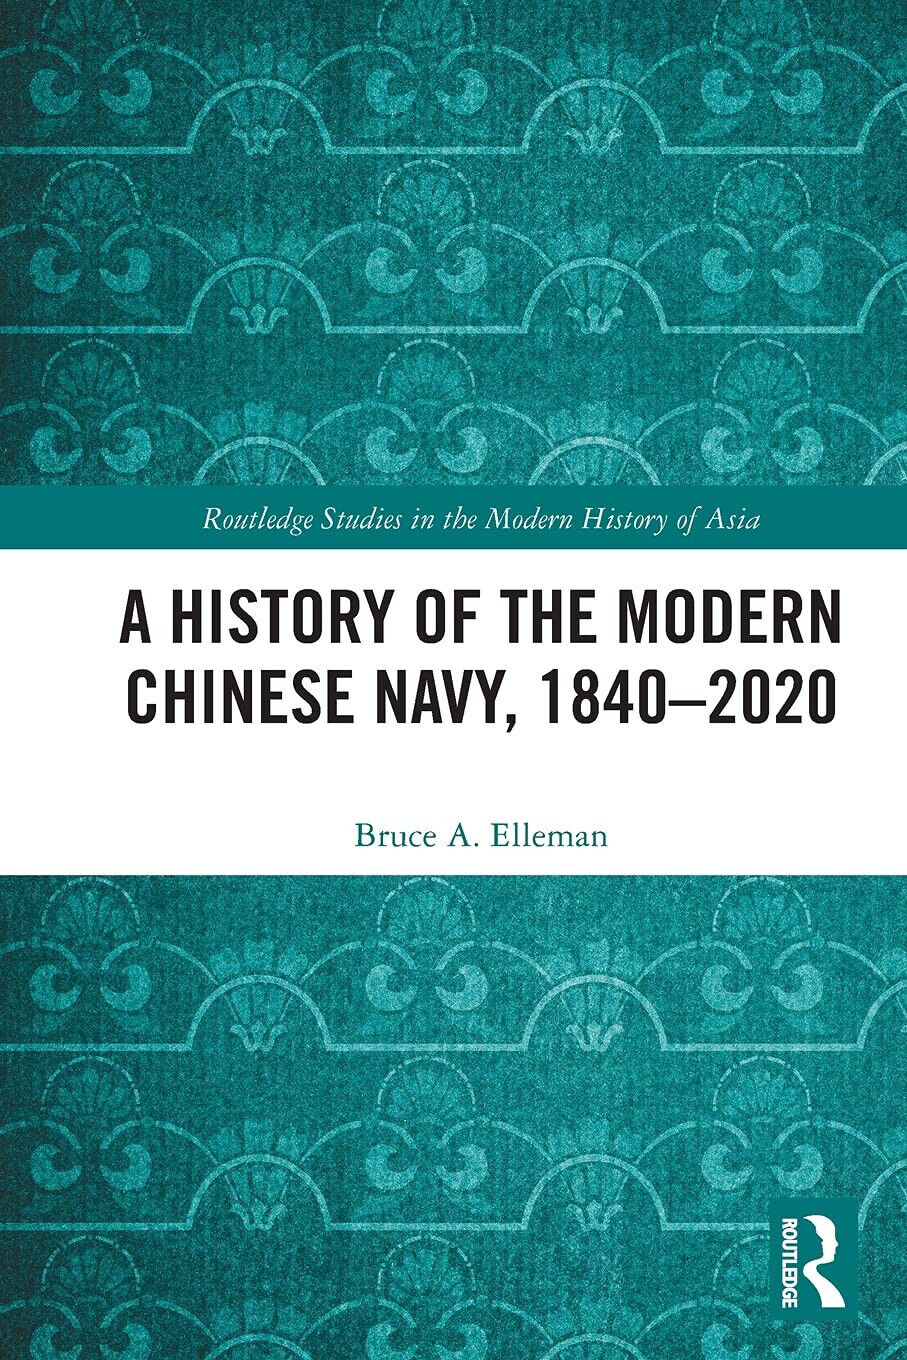 A History Of The Modern Chinese Navy, 1840-2020 - Bruce A. Elleman - 2021